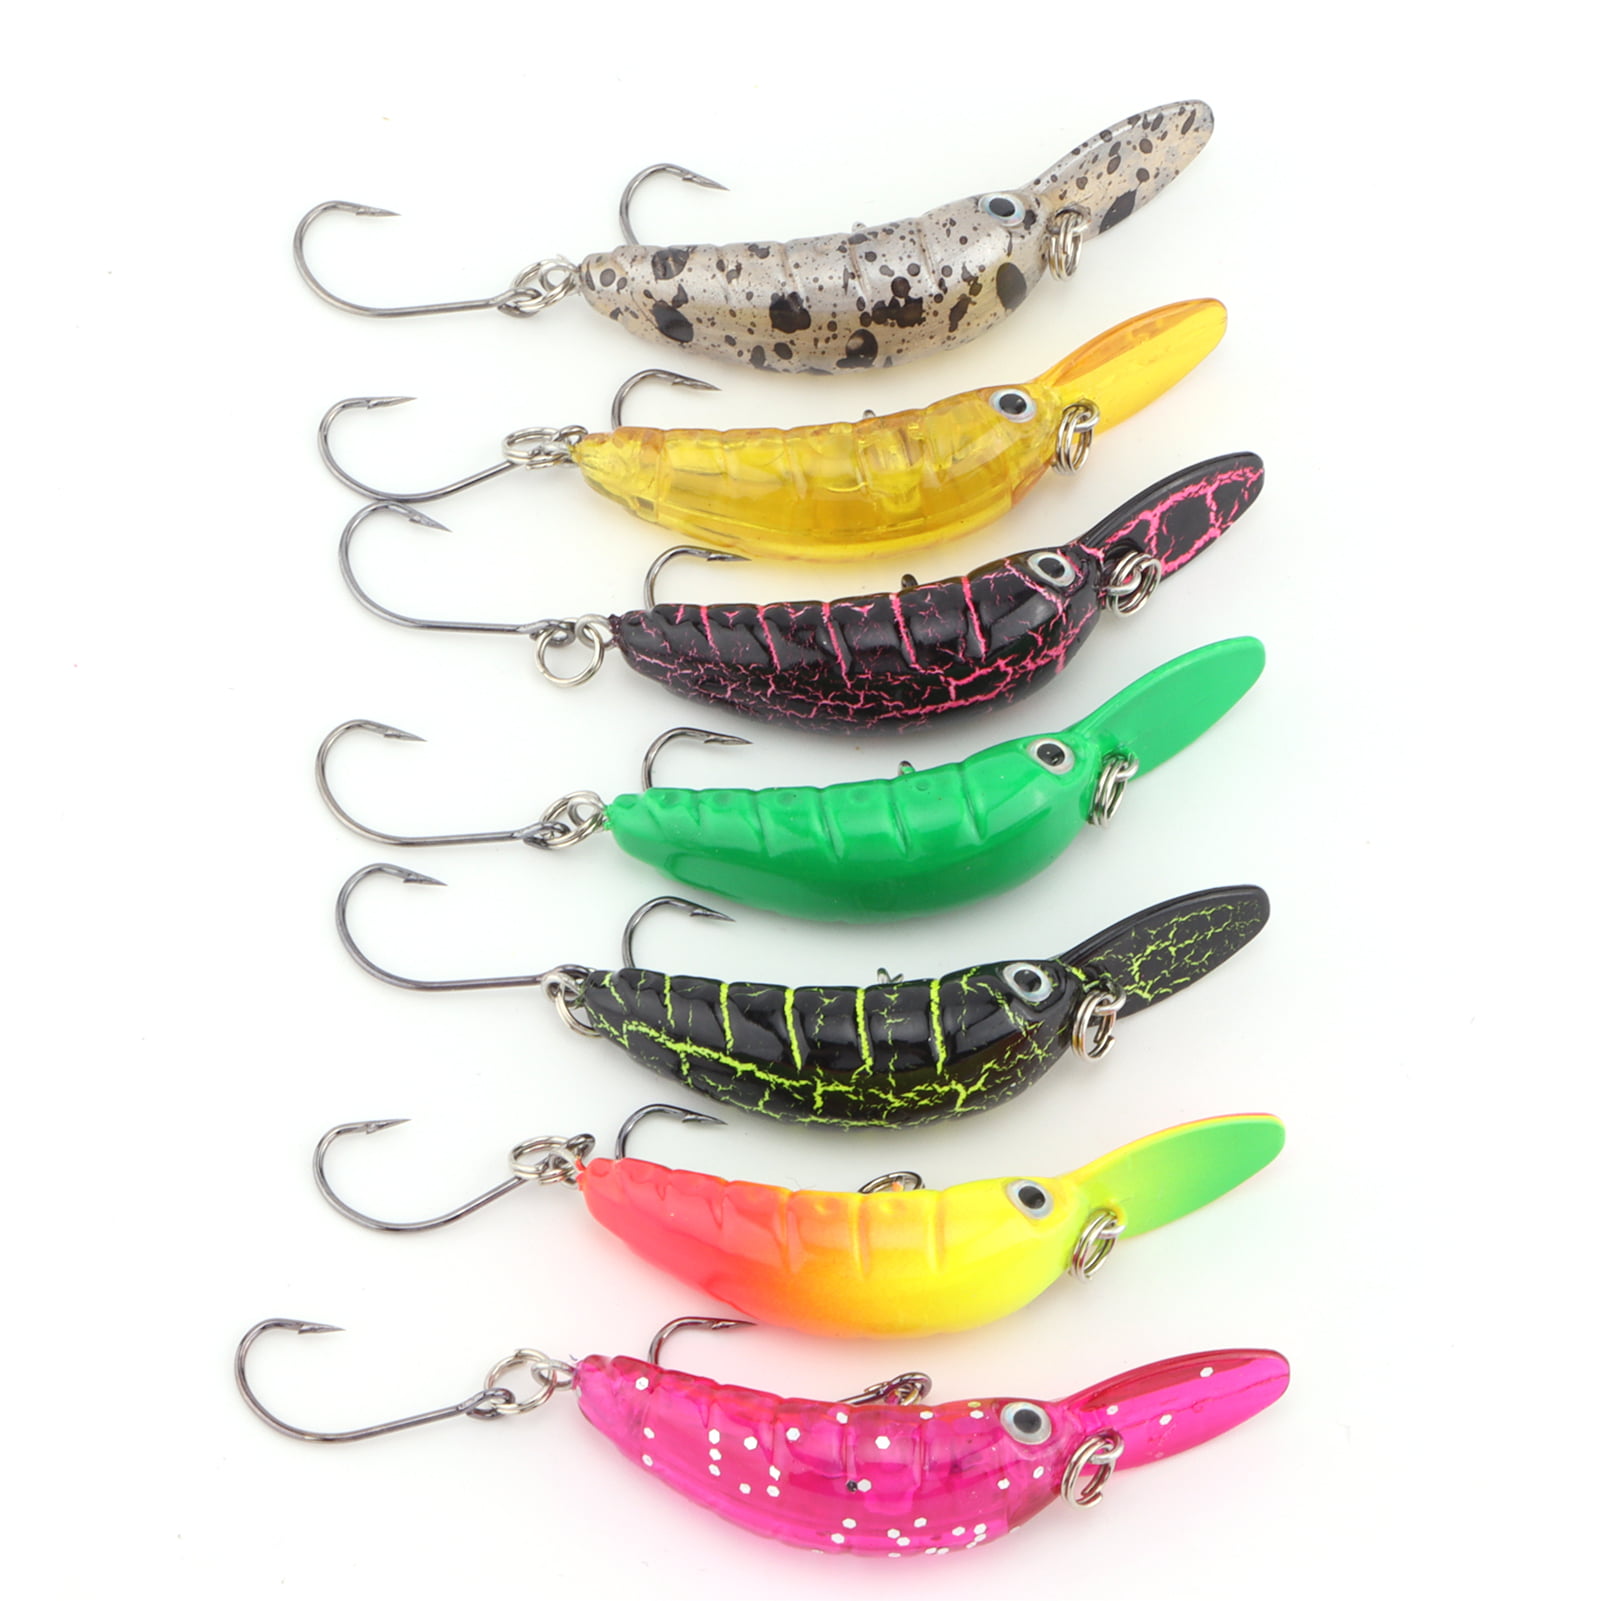 Colorful New 7x Fish Lures Bait Hooks Tackle Minnow Bass Trout Popper Variety 